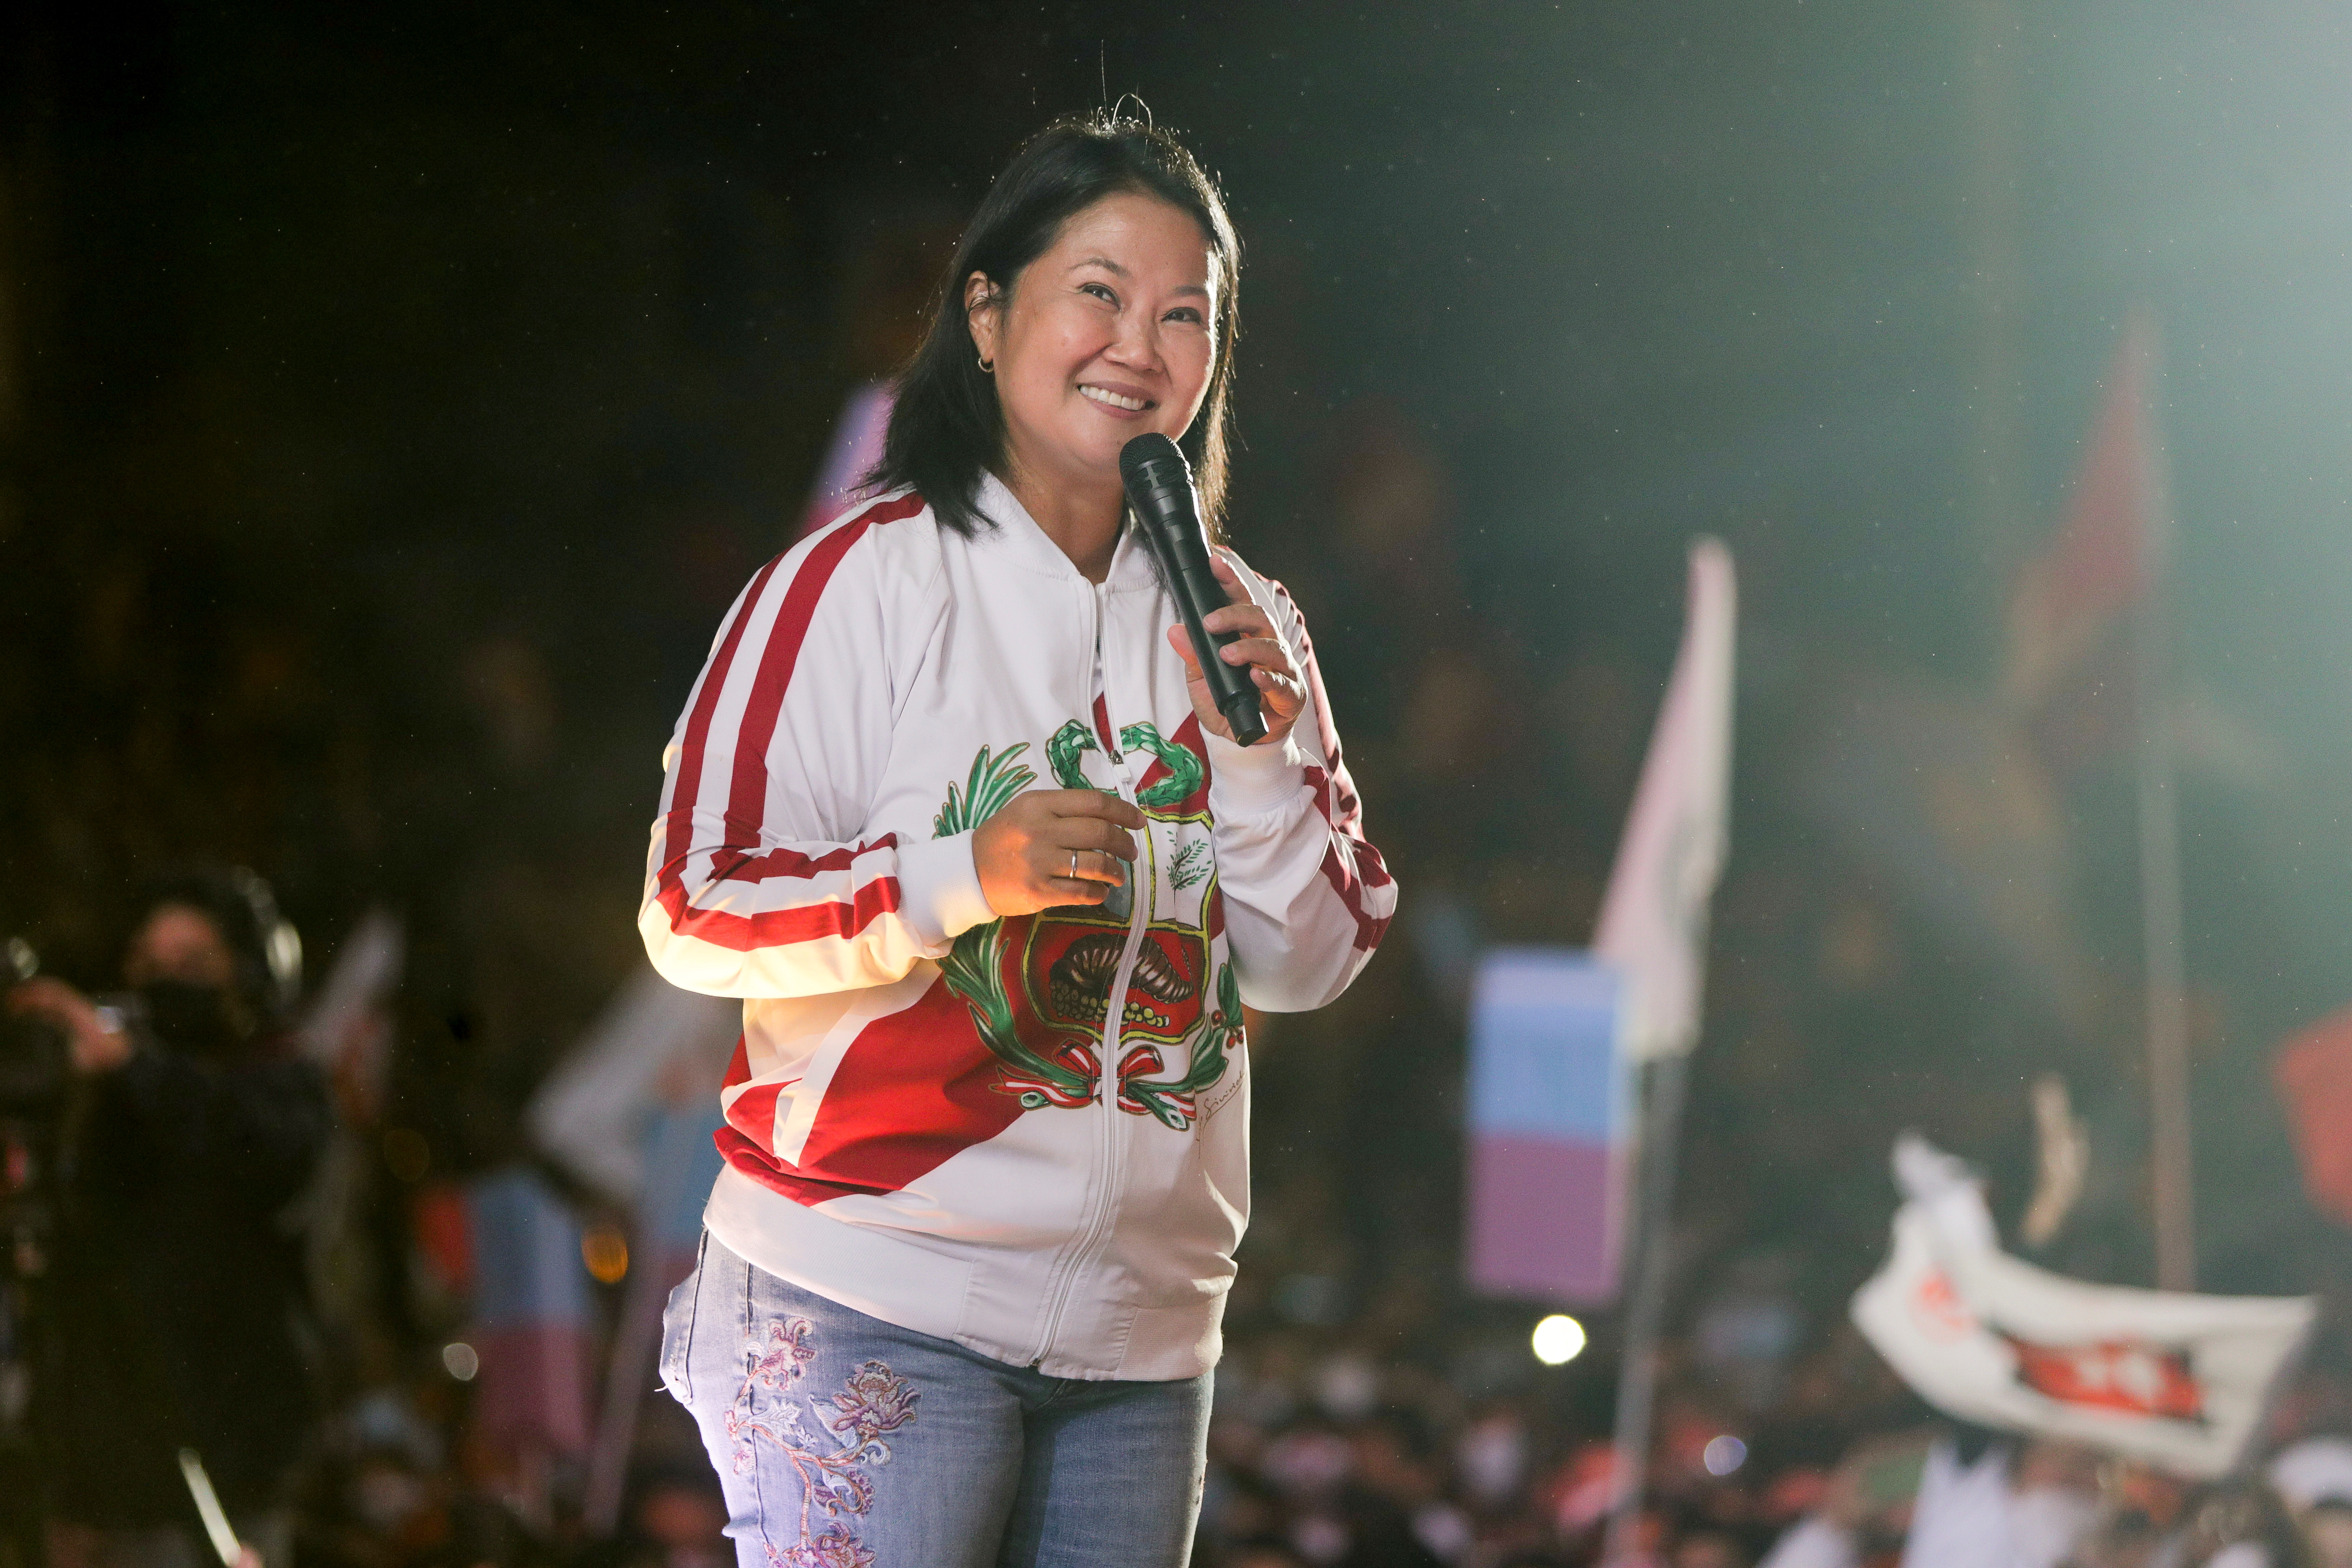 Peru's right-wing presidential candidate Keiko Fujimori addresses supporters at a final campaign event before a run-off election against socialist candidate Pedro Castillo on June 6, in Lima, Peru June 3, 2021. REUTERS/Sebastian Castaneda